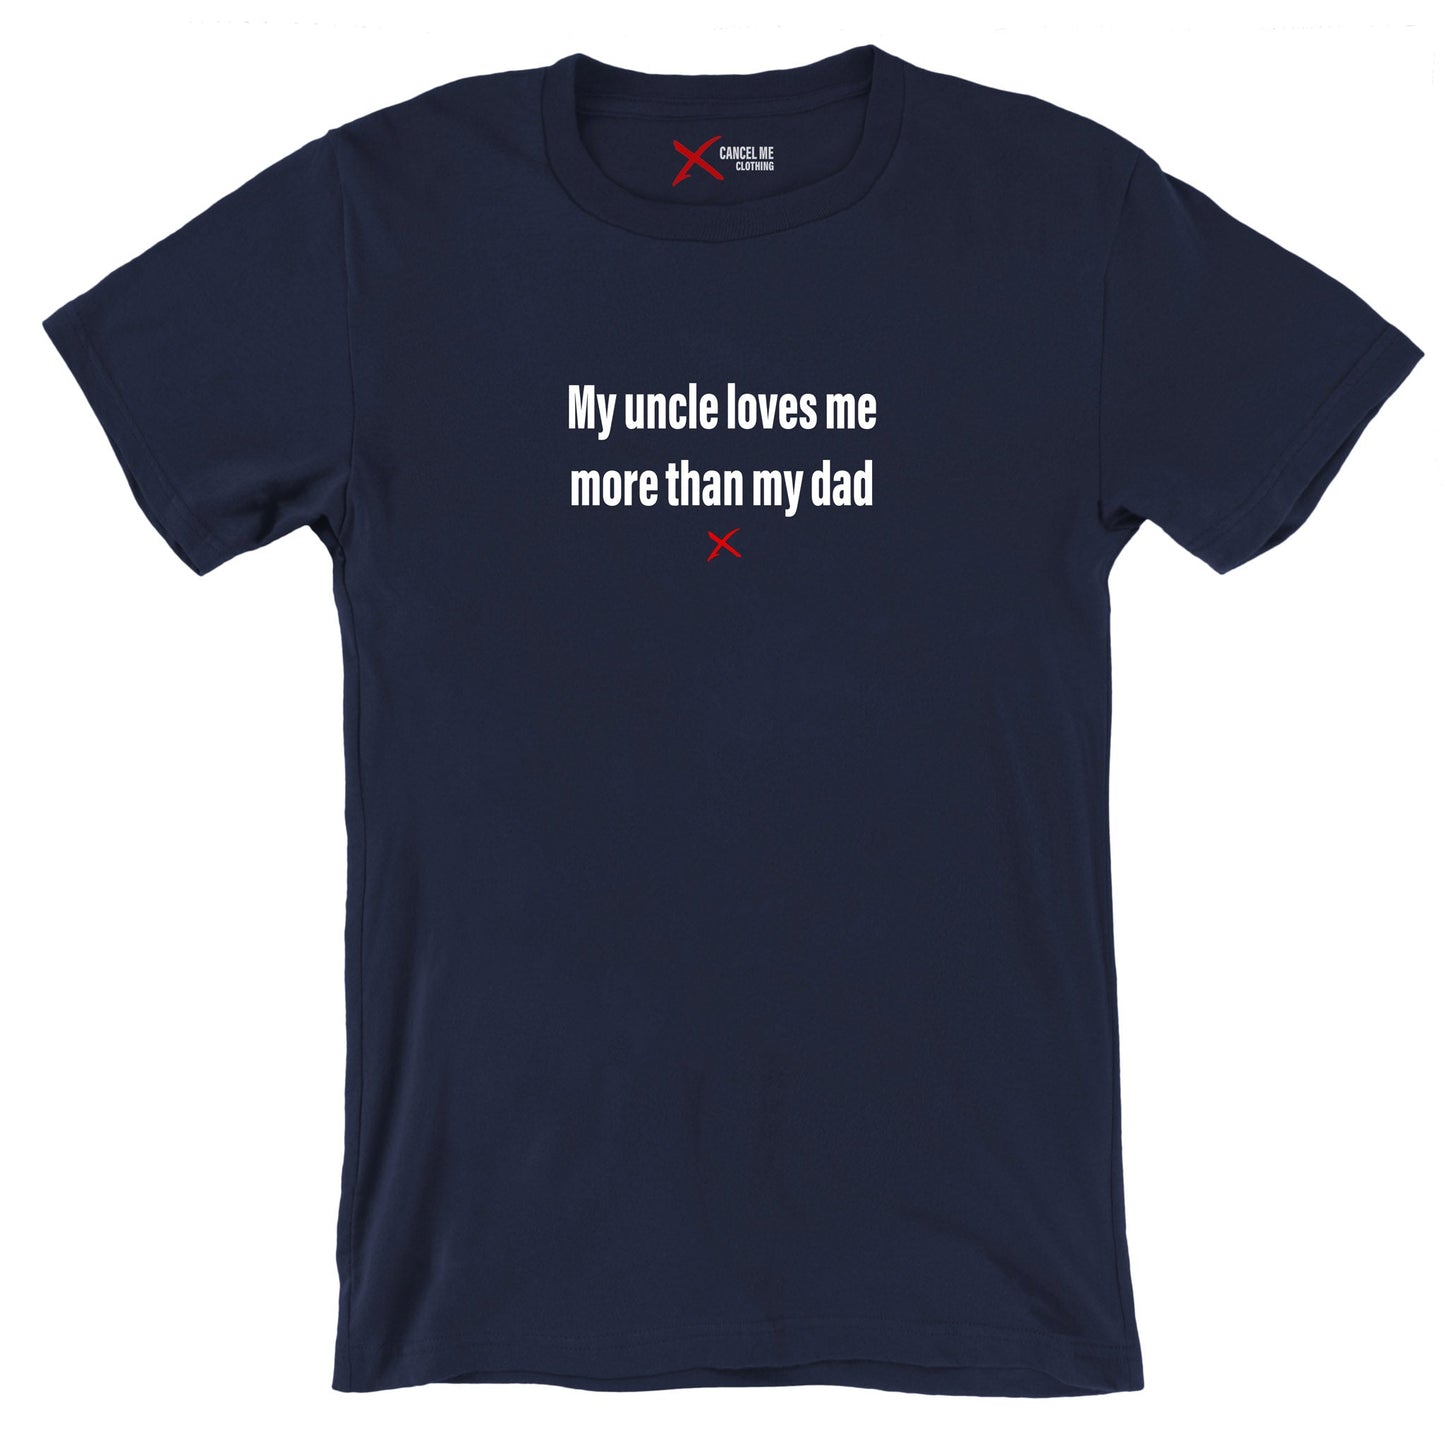 My uncle loves me more than my dad - Shirt